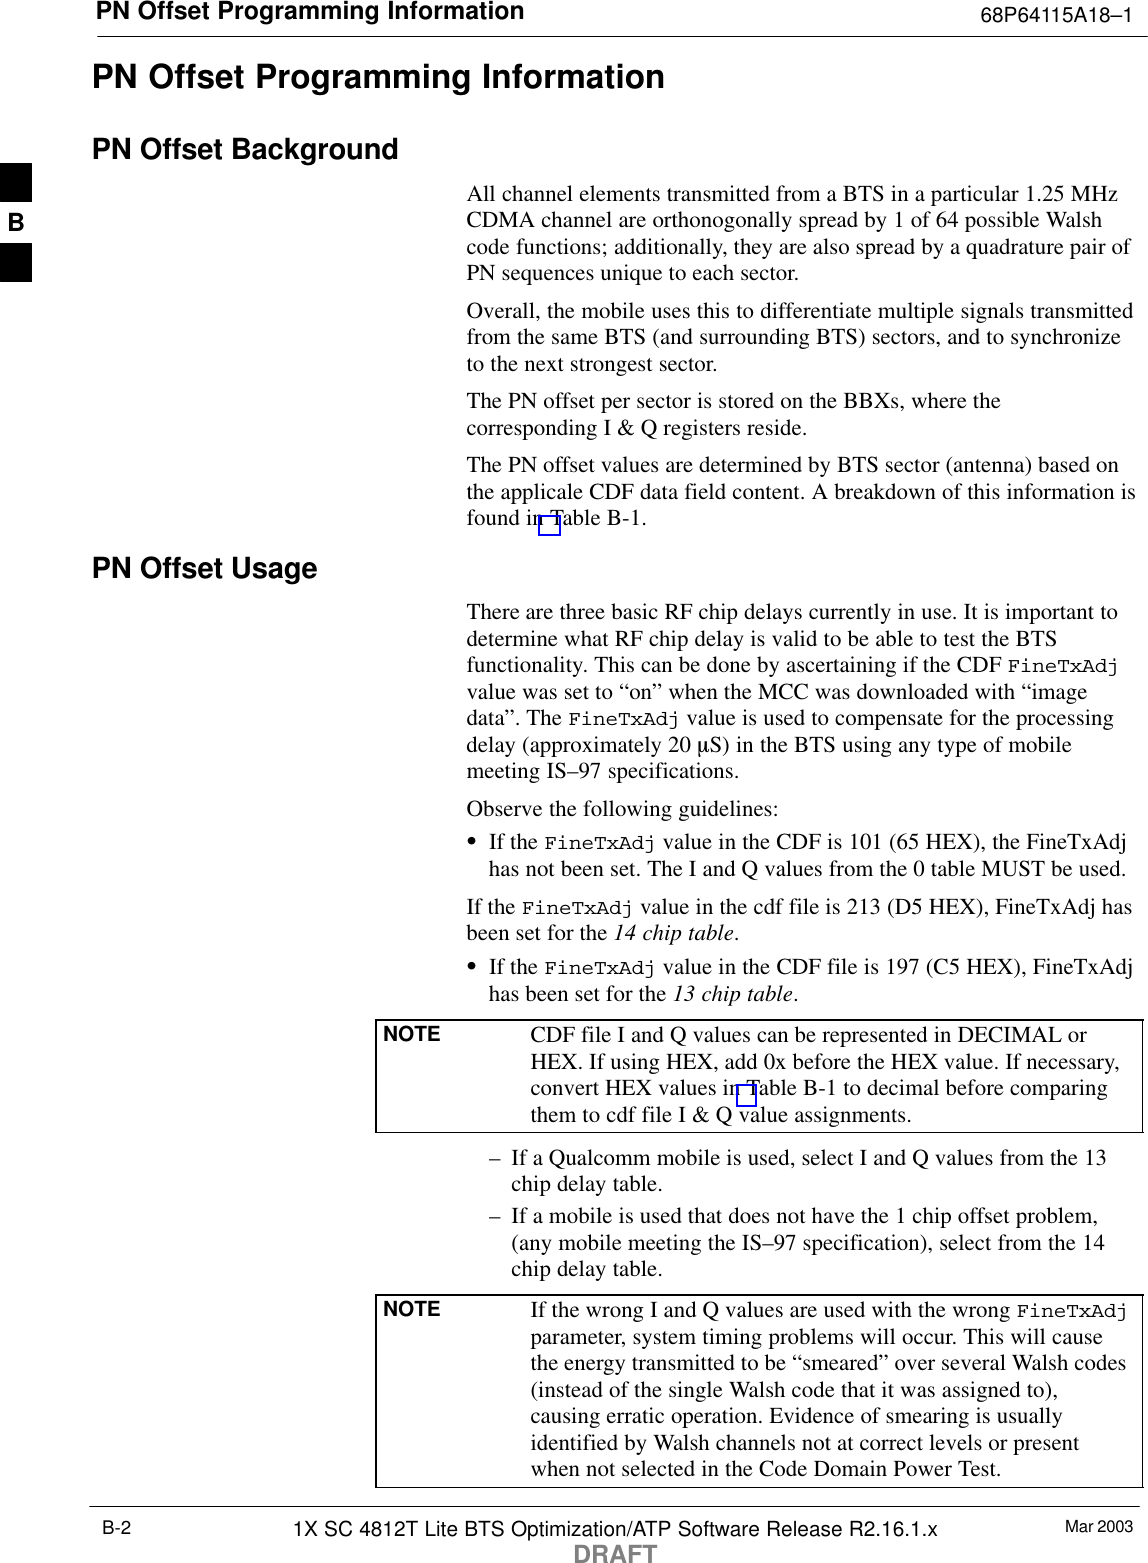 PN Offset Programming Information 68P64115A18–1Mar 20031X SC 4812T Lite BTS Optimization/ATP Software Release R2.16.1.xDRAFTB-2PN Offset Programming InformationPN Offset BackgroundAll channel elements transmitted from a BTS in a particular 1.25 MHzCDMA channel are orthonogonally spread by 1 of 64 possible Walshcode functions; additionally, they are also spread by a quadrature pair ofPN sequences unique to each sector.Overall, the mobile uses this to differentiate multiple signals transmittedfrom the same BTS (and surrounding BTS) sectors, and to synchronizeto the next strongest sector.The PN offset per sector is stored on the BBXs, where thecorresponding I &amp; Q registers reside.The PN offset values are determined by BTS sector (antenna) based onthe applicale CDF data field content. A breakdown of this information isfound in Table B-1.PN Offset Usage There are three basic RF chip delays currently in use. It is important todetermine what RF chip delay is valid to be able to test the BTSfunctionality. This can be done by ascertaining if the CDF FineTxAdjvalue was set to “on” when the MCC was downloaded with “imagedata”. The FineTxAdj value is used to compensate for the processingdelay (approximately 20 mS) in the BTS using any type of mobilemeeting IS–97 specifications.Observe the following guidelines:SIf the FineTxAdj value in the CDF is 101 (65 HEX), the FineTxAdjhas not been set. The I and Q values from the 0 table MUST be used.If the FineTxAdj value in the cdf file is 213 (D5 HEX), FineTxAdj hasbeen set for the 14 chip table.SIf the FineTxAdj value in the CDF file is 197 (C5 HEX), FineTxAdjhas been set for the 13 chip table.NOTE CDF file I and Q values can be represented in DECIMAL orHEX. If using HEX, add 0x before the HEX value. If necessary,convert HEX values in Table B-1 to decimal before comparingthem to cdf file I &amp; Q value assignments.– If a Qualcomm mobile is used, select I and Q values from the 13chip delay table.– If a mobile is used that does not have the 1 chip offset problem,(any mobile meeting the IS–97 specification), select from the 14chip delay table.NOTE If the wrong I and Q values are used with the wrong FineTxAdjparameter, system timing problems will occur. This will causethe energy transmitted to be “smeared” over several Walsh codes(instead of the single Walsh code that it was assigned to),causing erratic operation. Evidence of smearing is usuallyidentified by Walsh channels not at correct levels or presentwhen not selected in the Code Domain Power Test.B